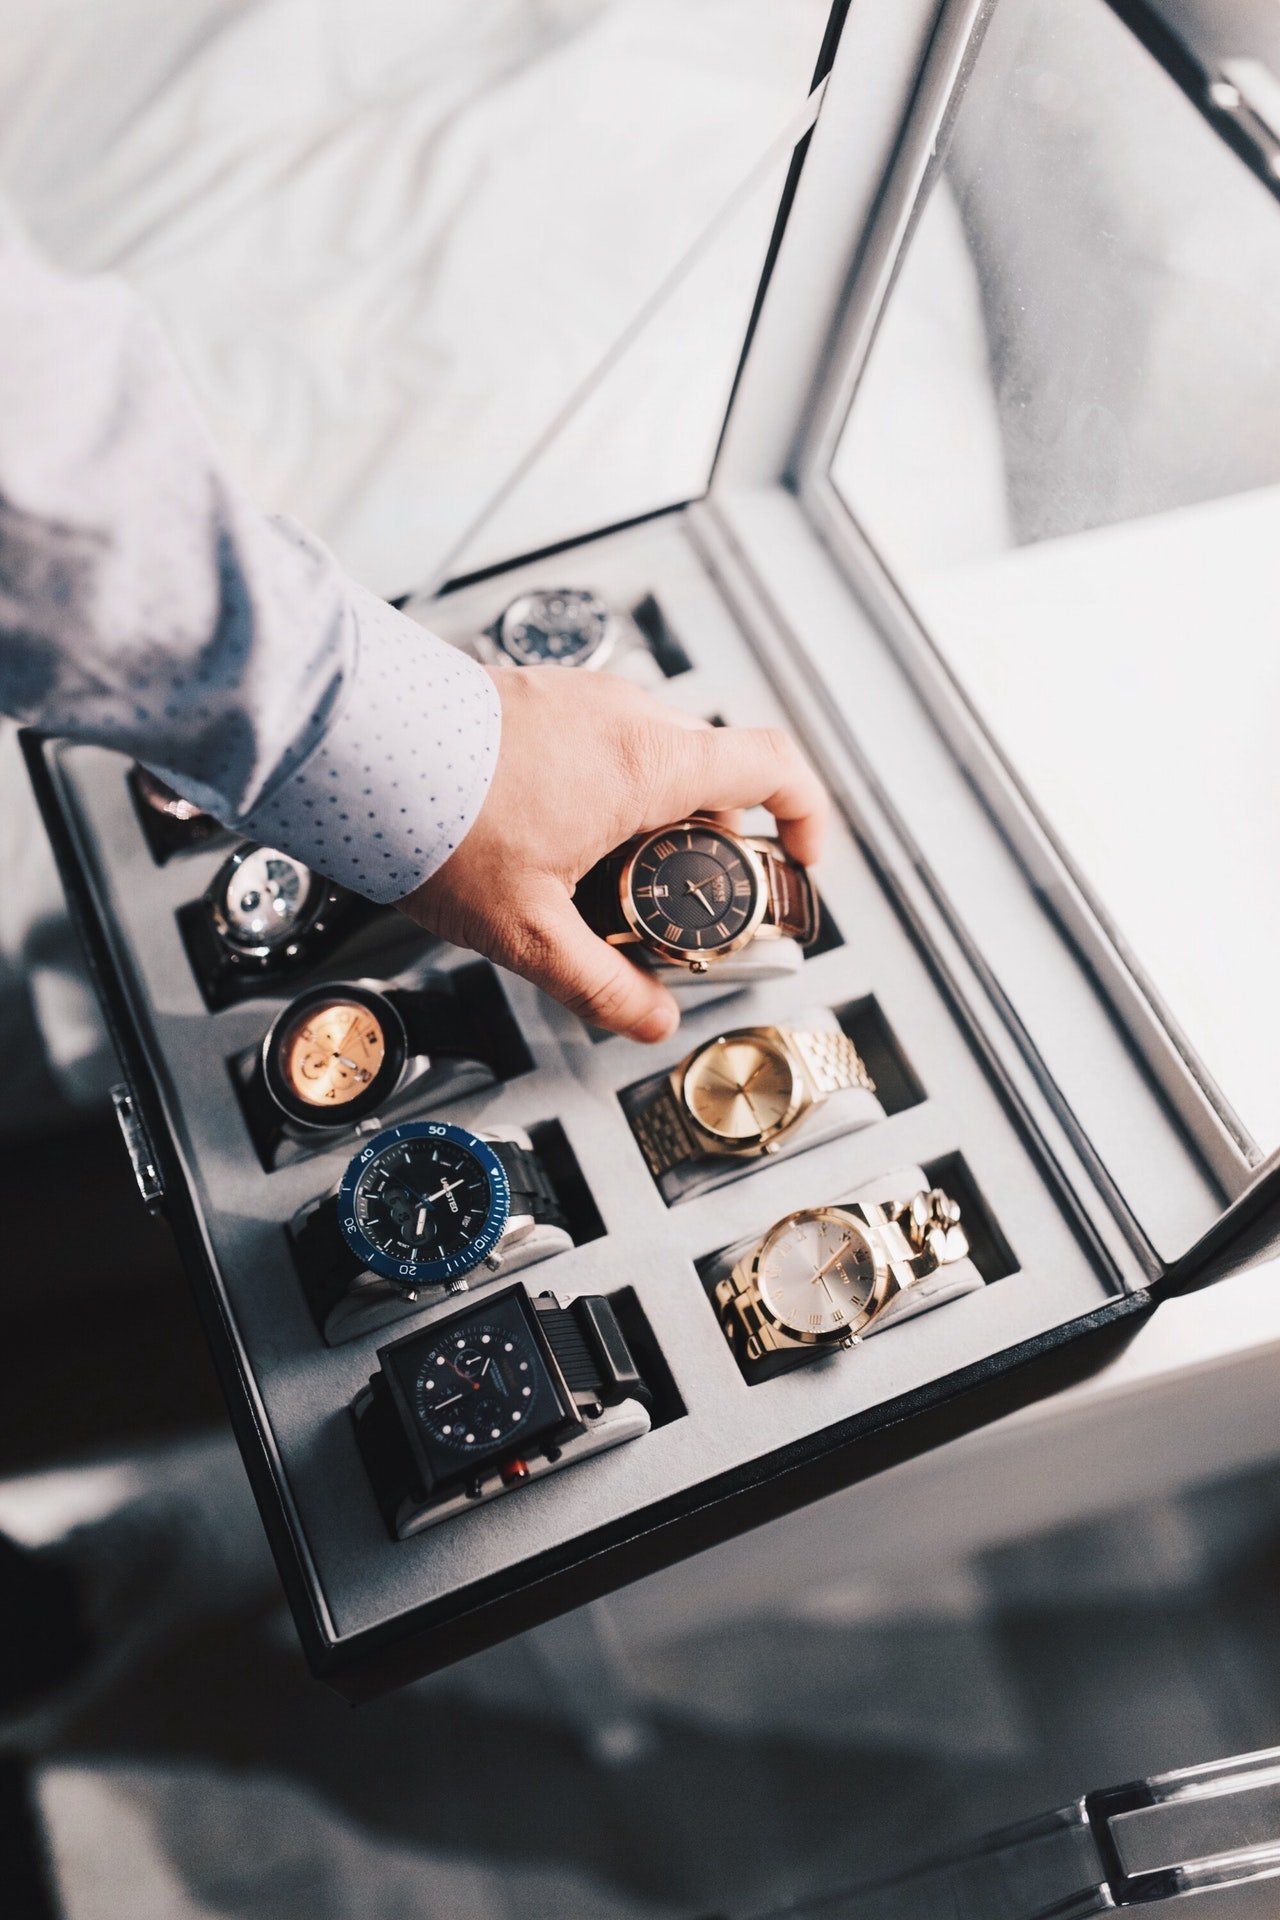 Collection of watches in a display case | Photo: Pexels